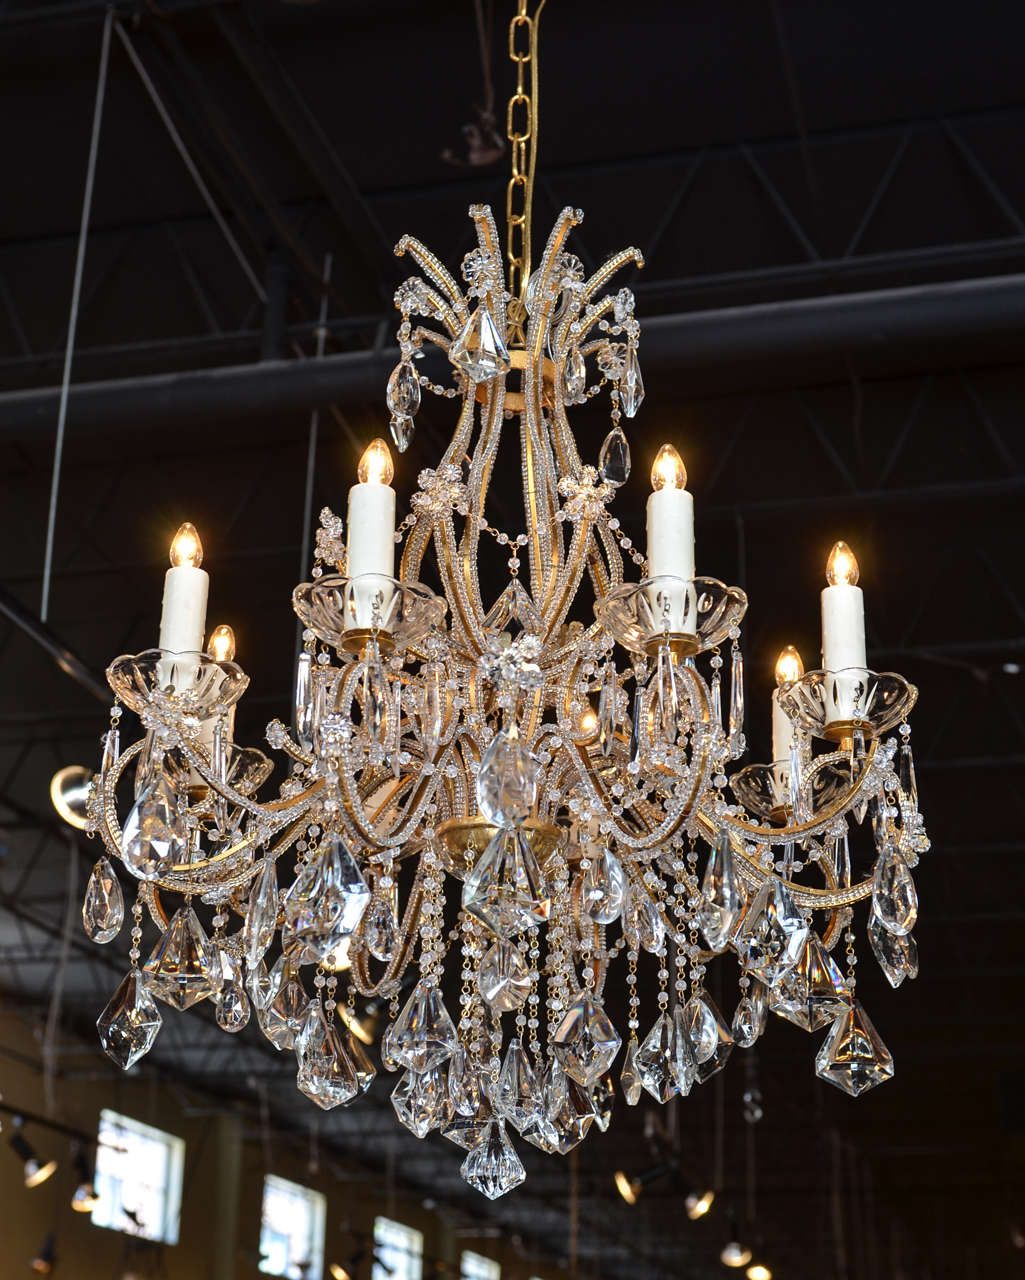 A French Louis XV style eight-light crystal chandelier with gilt metal beaded armature from the 19th century. This French crystal chandelier features a nicely curved armature supporting eight scrolled arms. Delicately adorned with rosettes, this